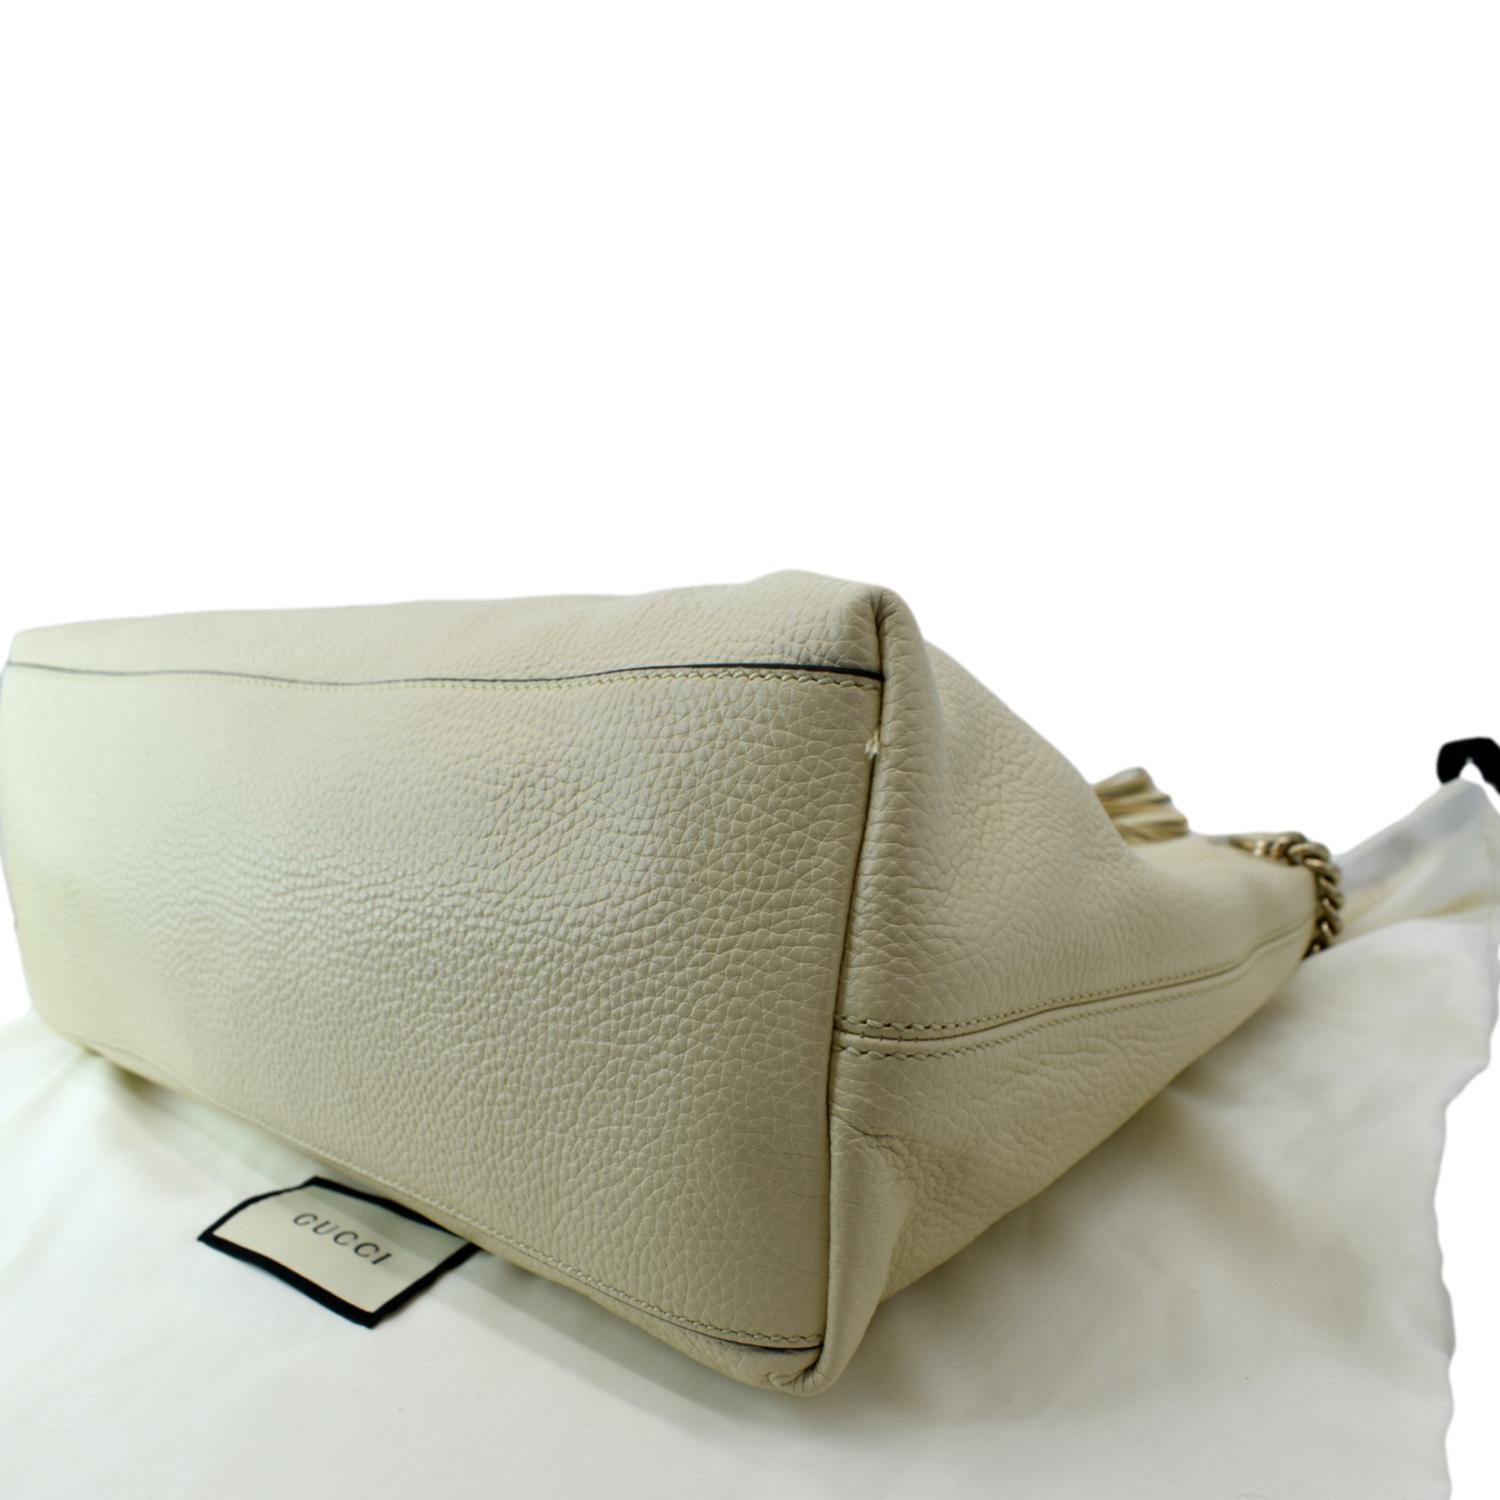  Gucci Soho Ivoire Ivory Gold Double Chain Soft Hobo Leather  Shoulder Bag Italy Authentic New : Clothing, Shoes & Jewelry